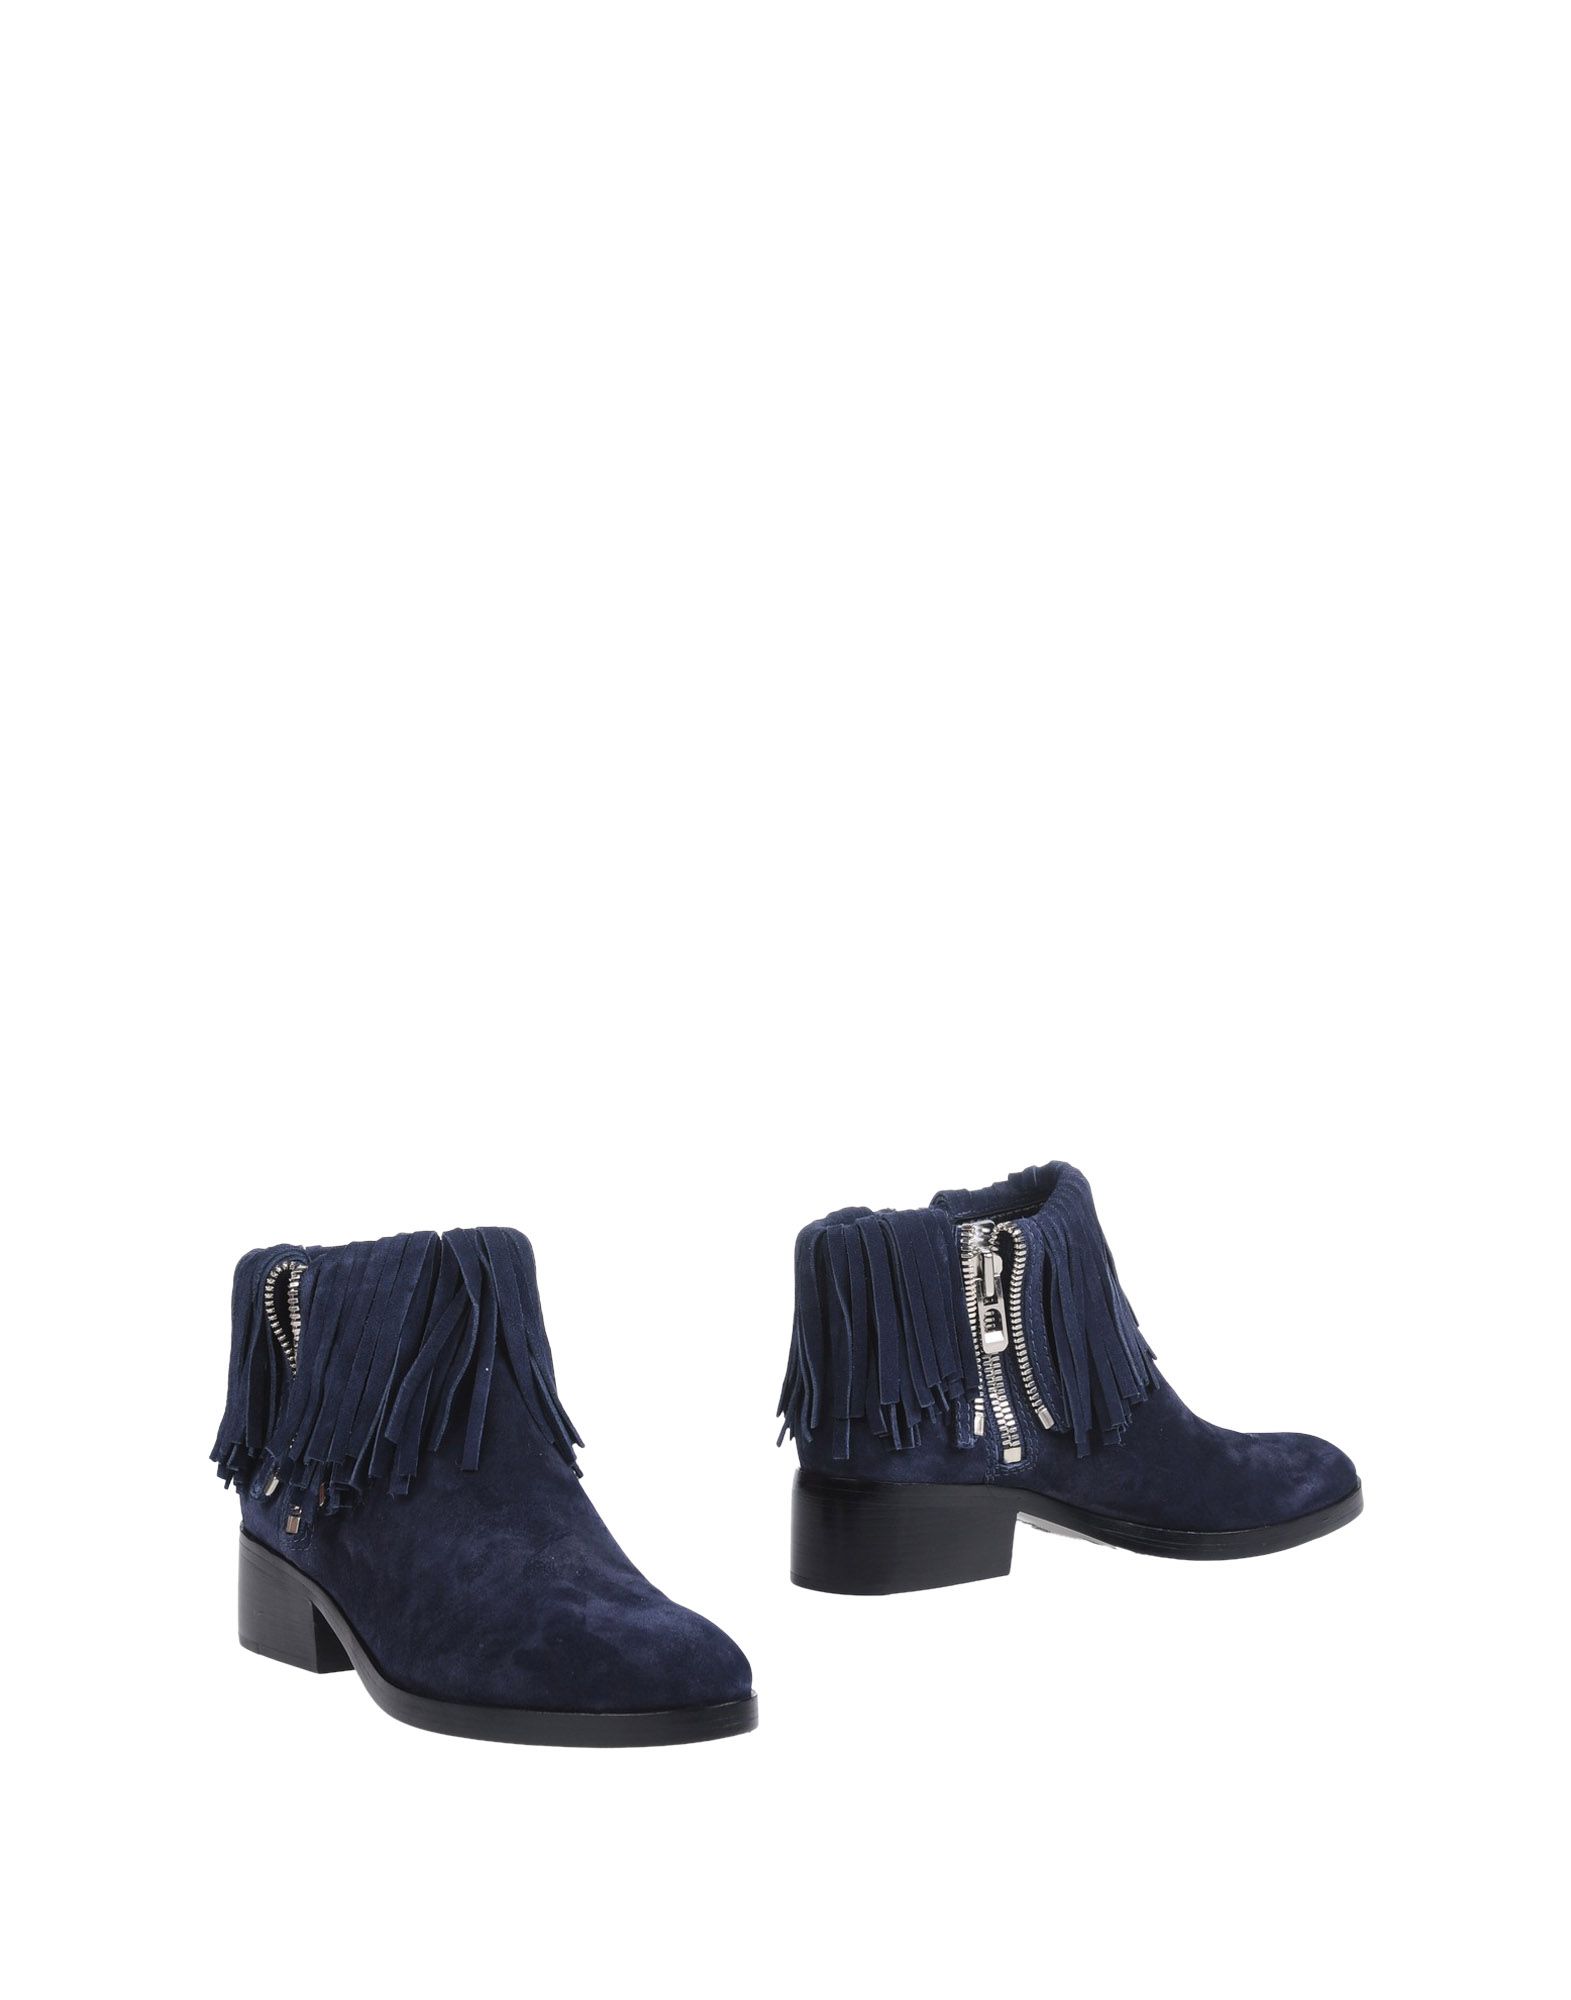 3.1 PHILLIP LIM / フィリップ リム ANKLE BOOTS,11116179CK 7